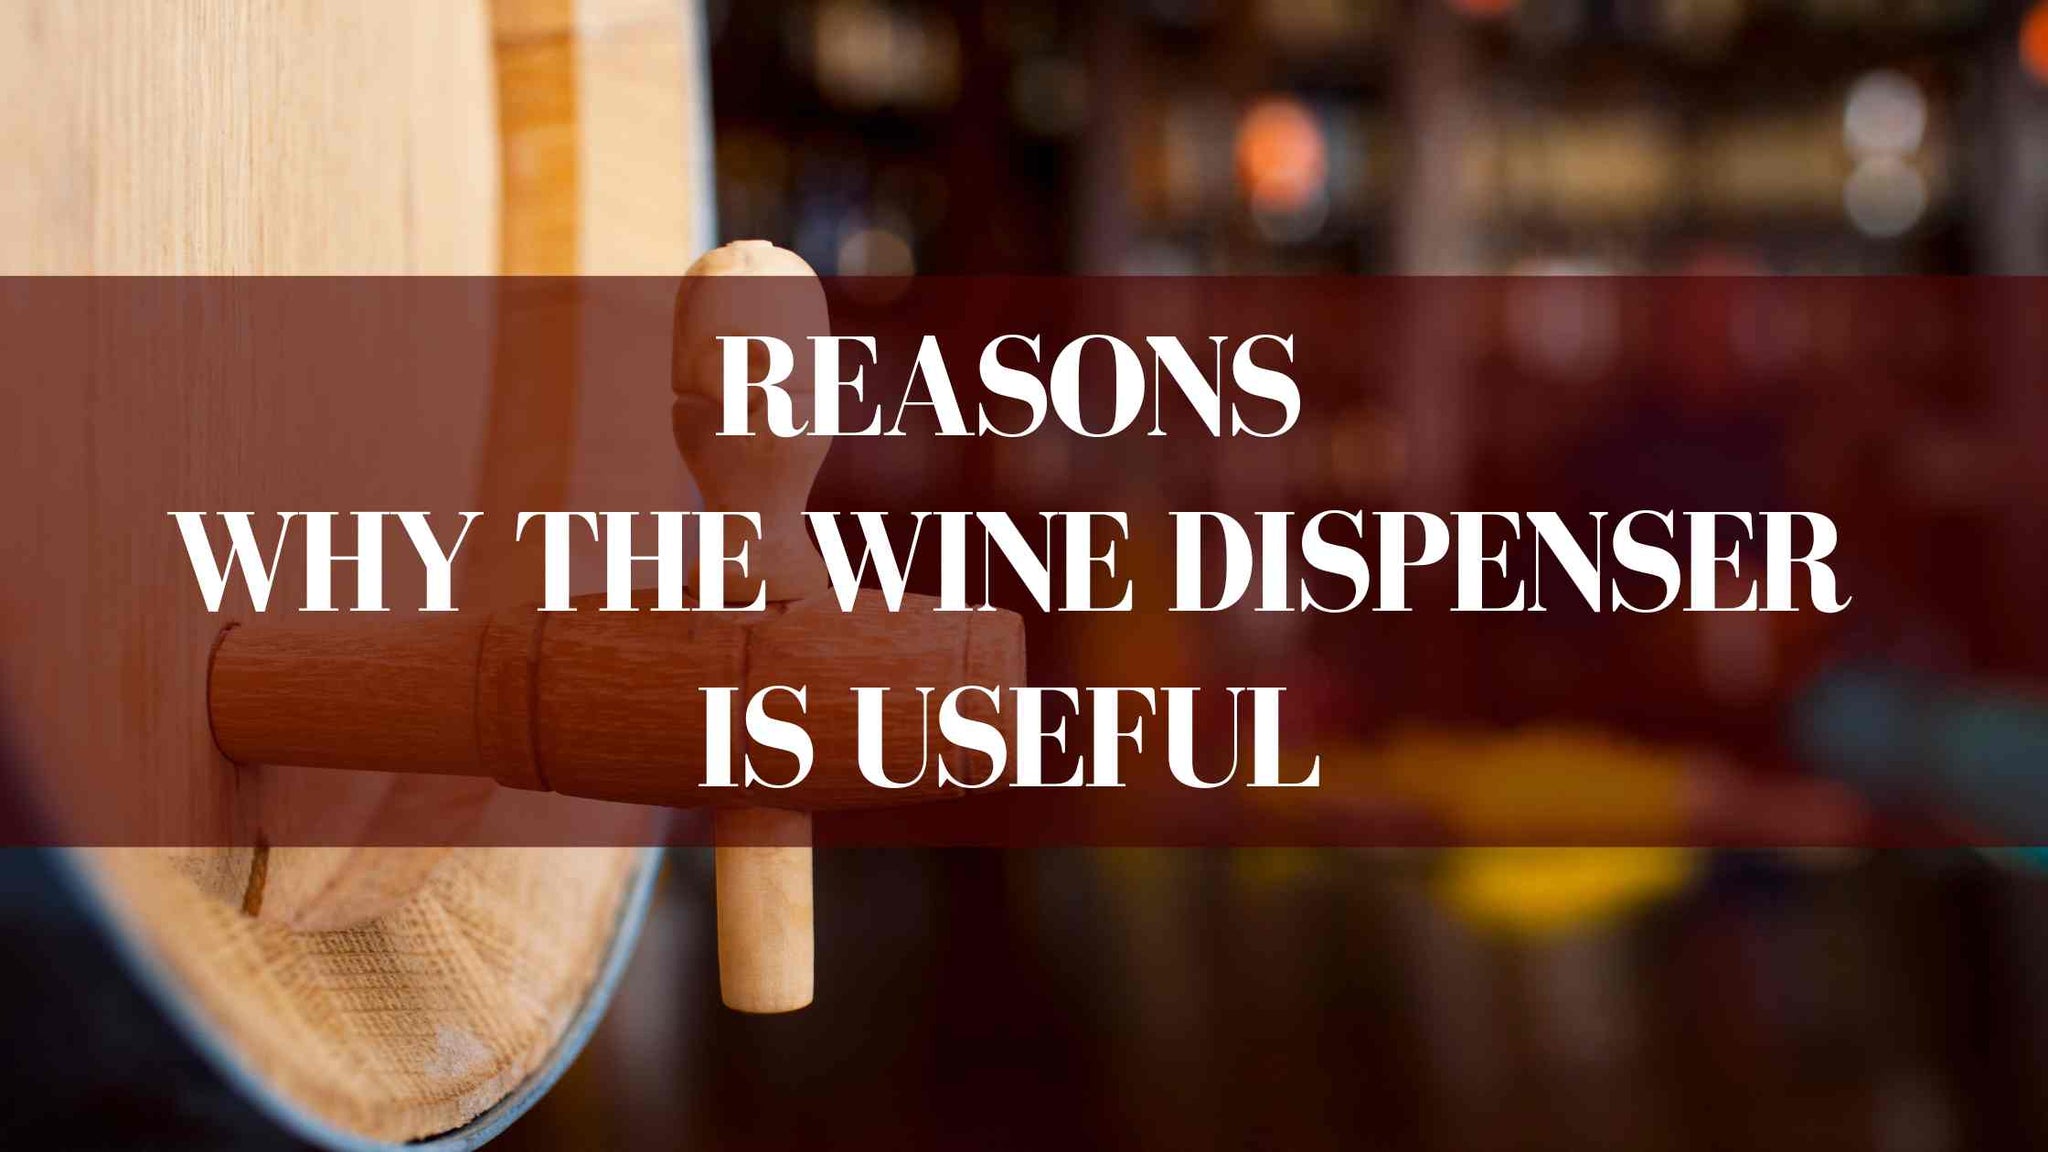 Reasons Why The Wine Dispenser is Useful